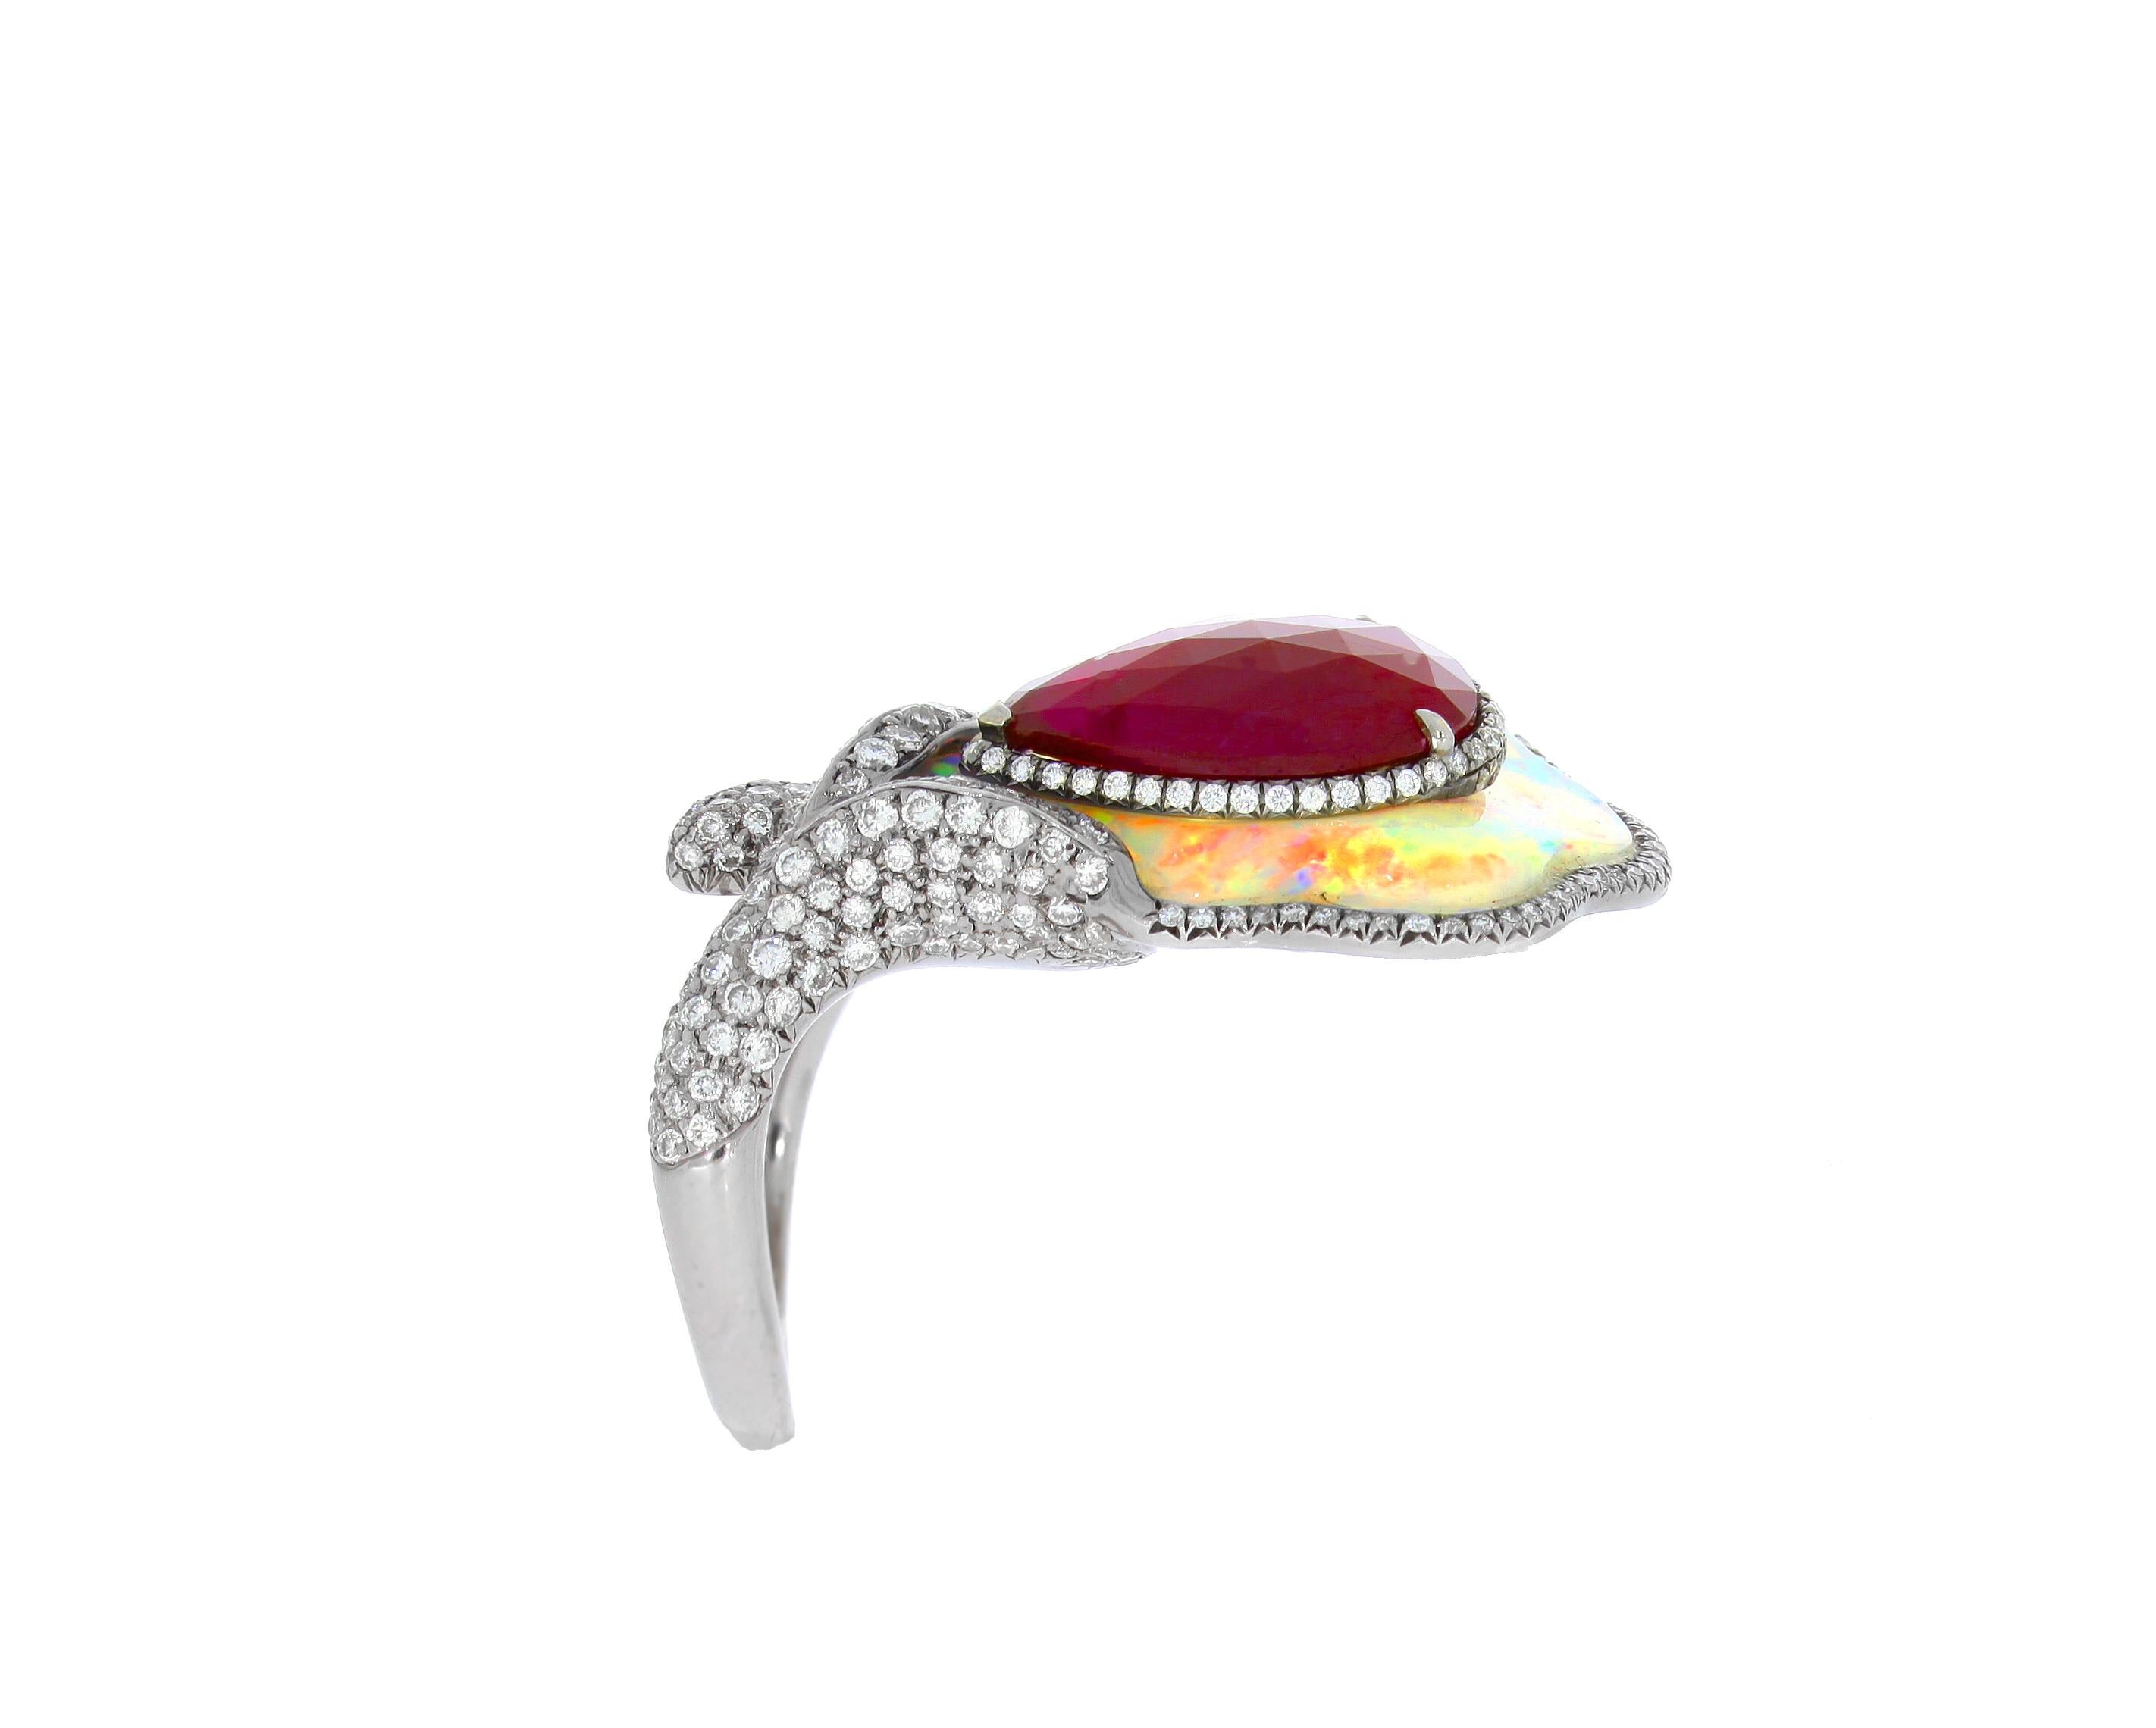 Made from 18 carat white gold, this Chatila ring's play of color on the white opal is enhanced with a 3.54 carat pear shaped ruby in the center, as well as the scintillating white diamonds on its border and band.

Details:

- White opal with a total